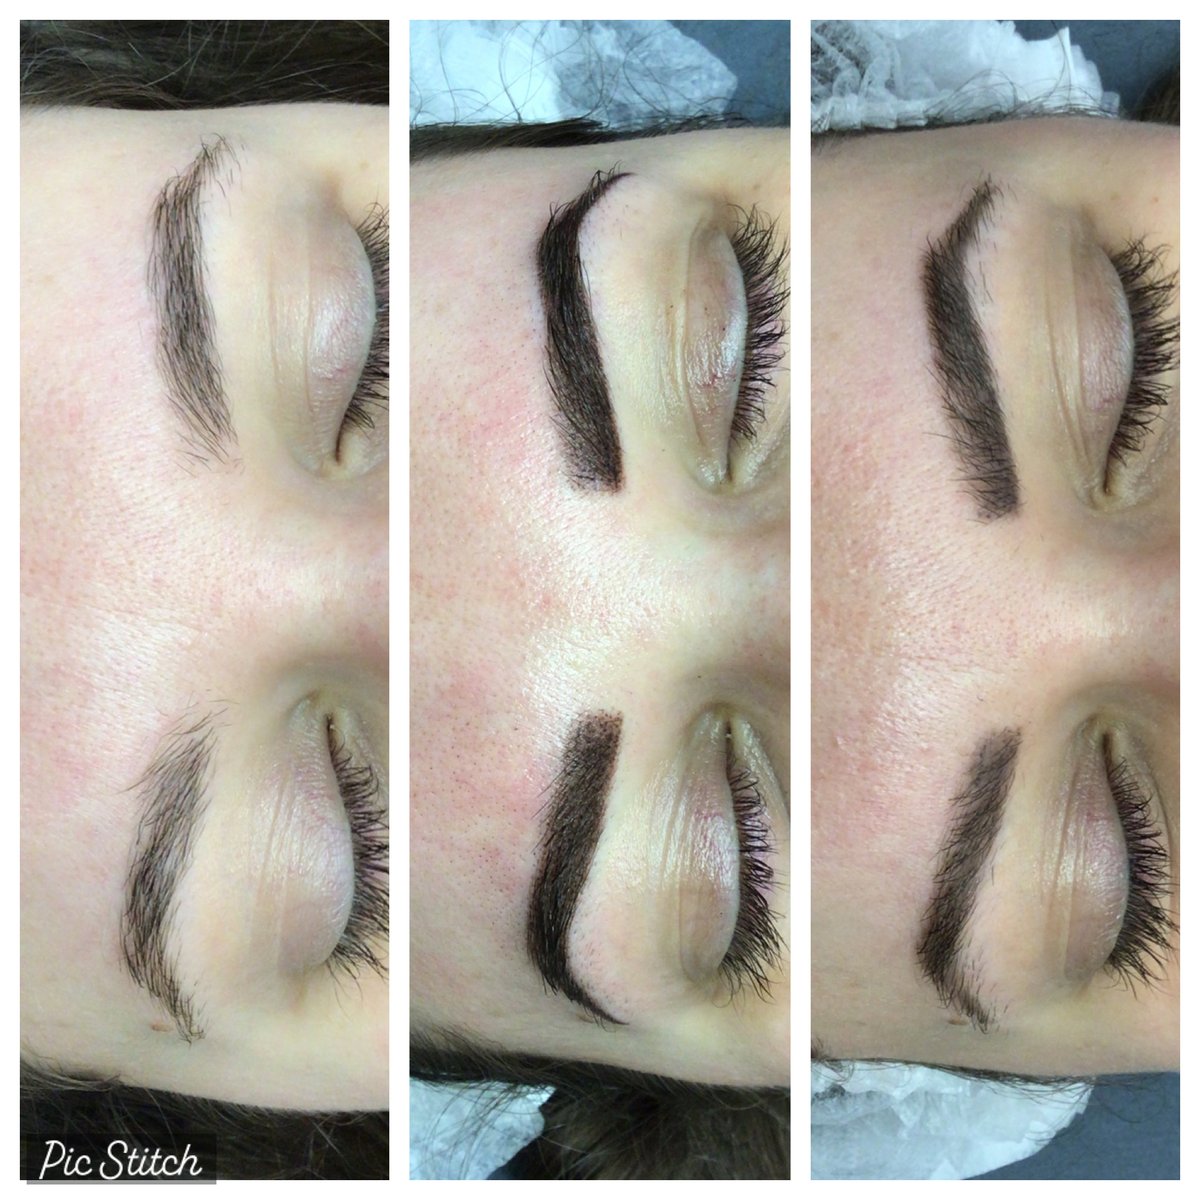 From left 👈 to right 👉 before, immediately after, and healed Ombre brows after 1st session! 💯
**Results do vary based on lifestyle and skin type,** but usually can last on average up to 2-3 years.
 #ombreeyebrow #semipermanenteyebrows #spmubrows #spmuartist